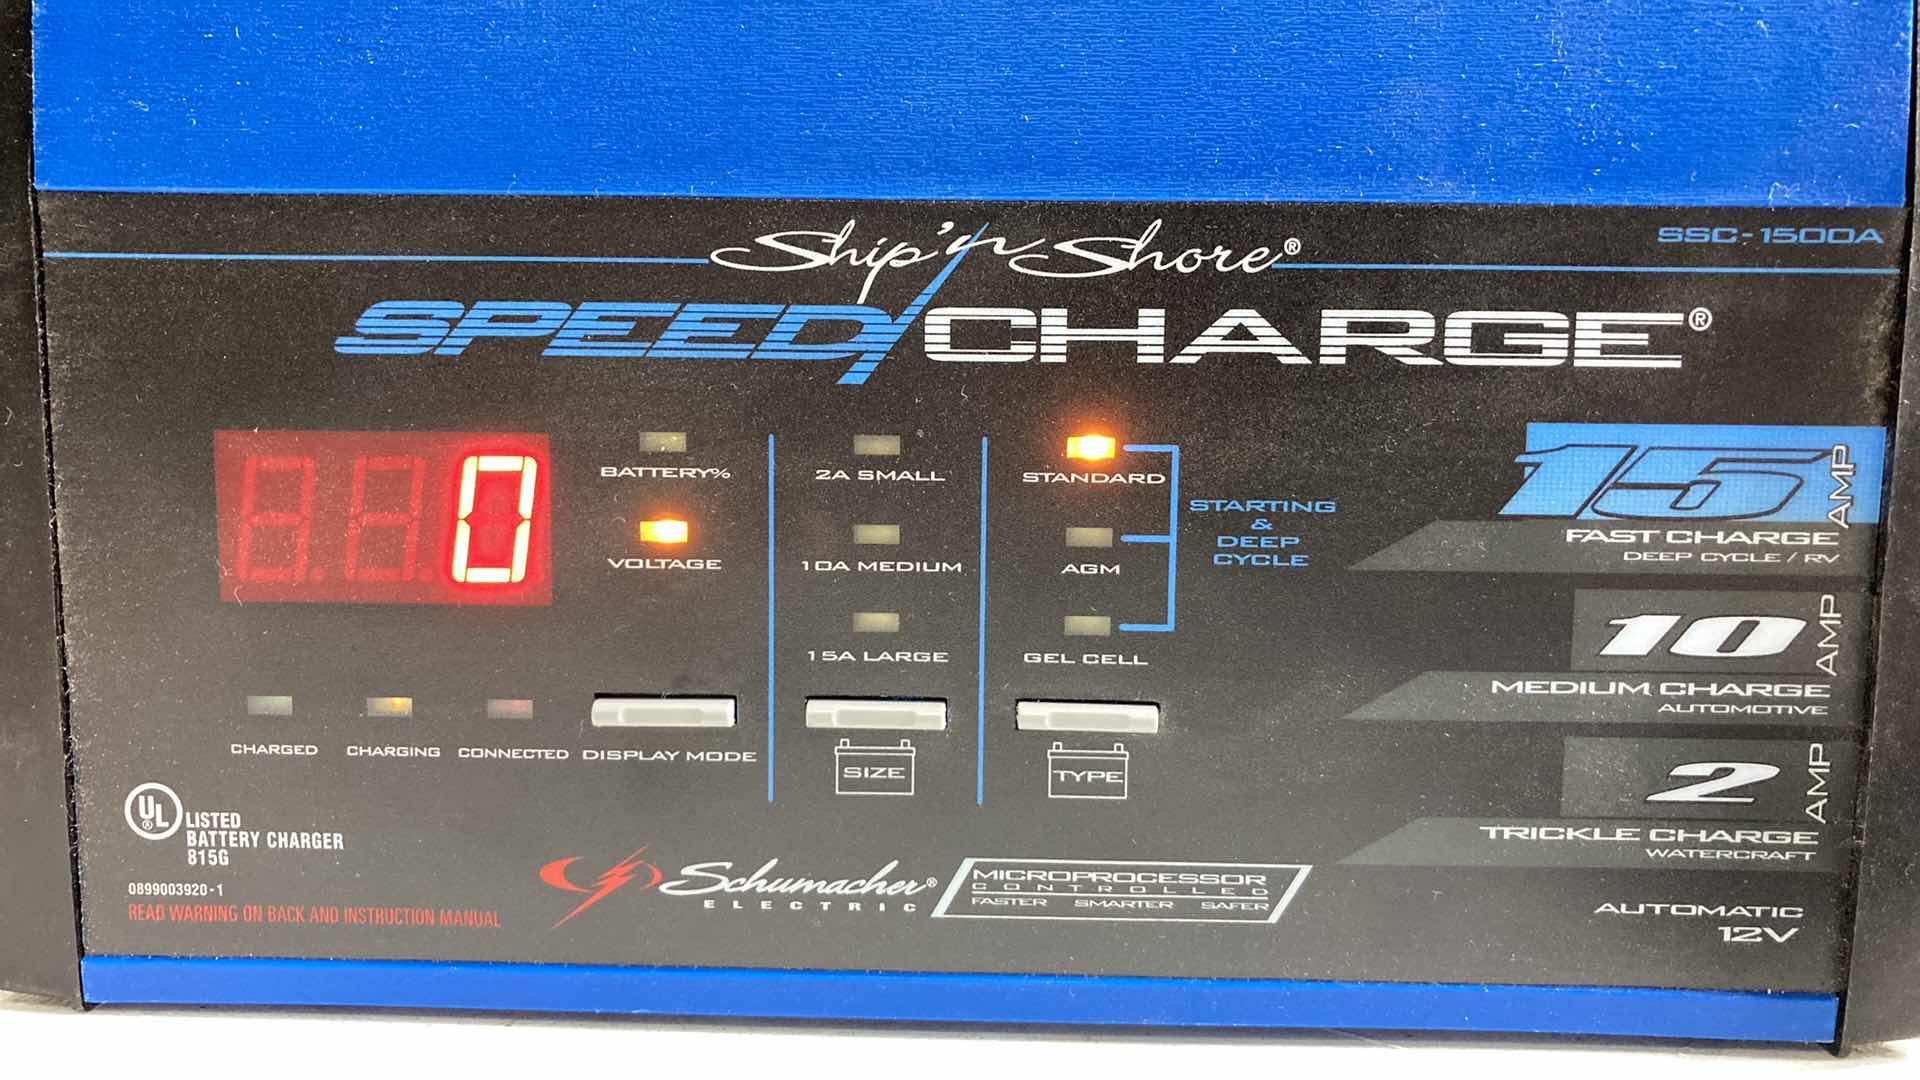 Photo 2 of SCHUMACHER ELECTRIC SHIP & SHORE BATTERY FAST CHARGER MODEL SSC-1500A